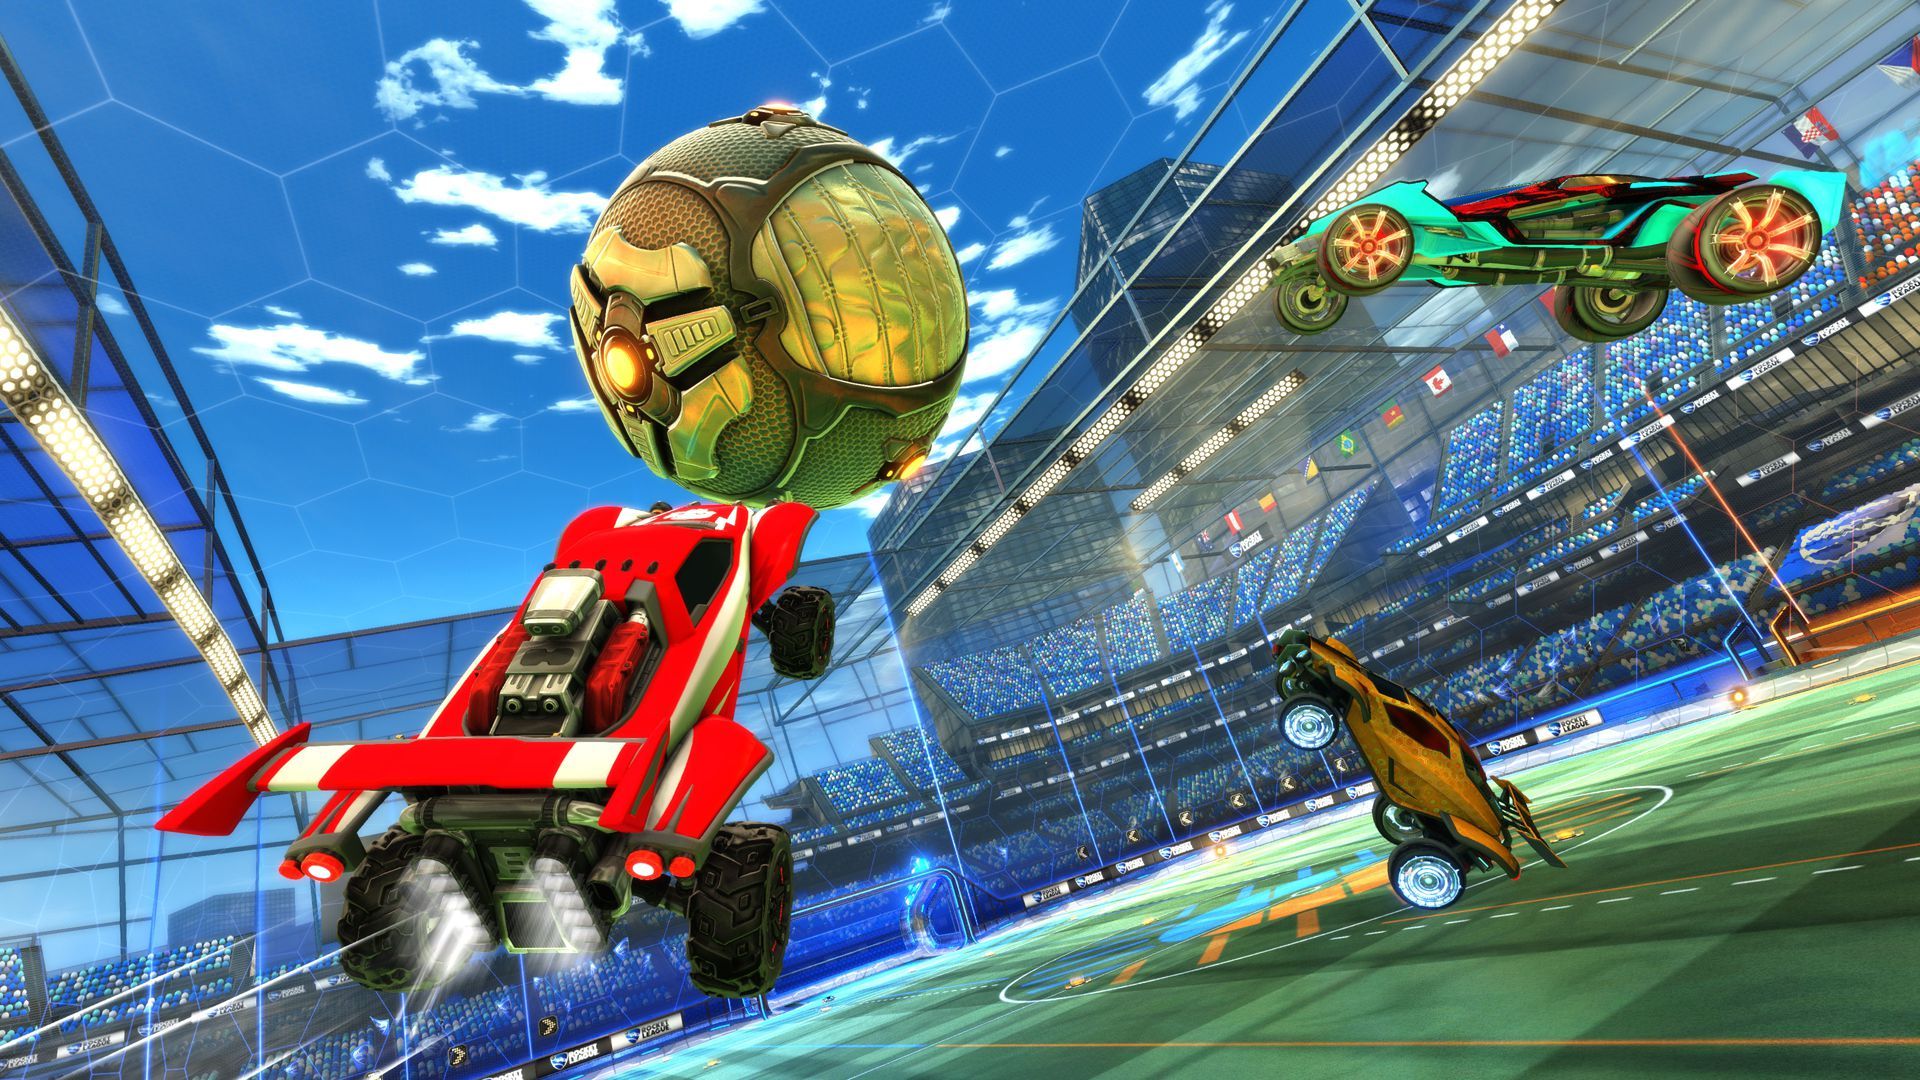 Screenshot of a scene from a video game that shows a red vehicle with a ball